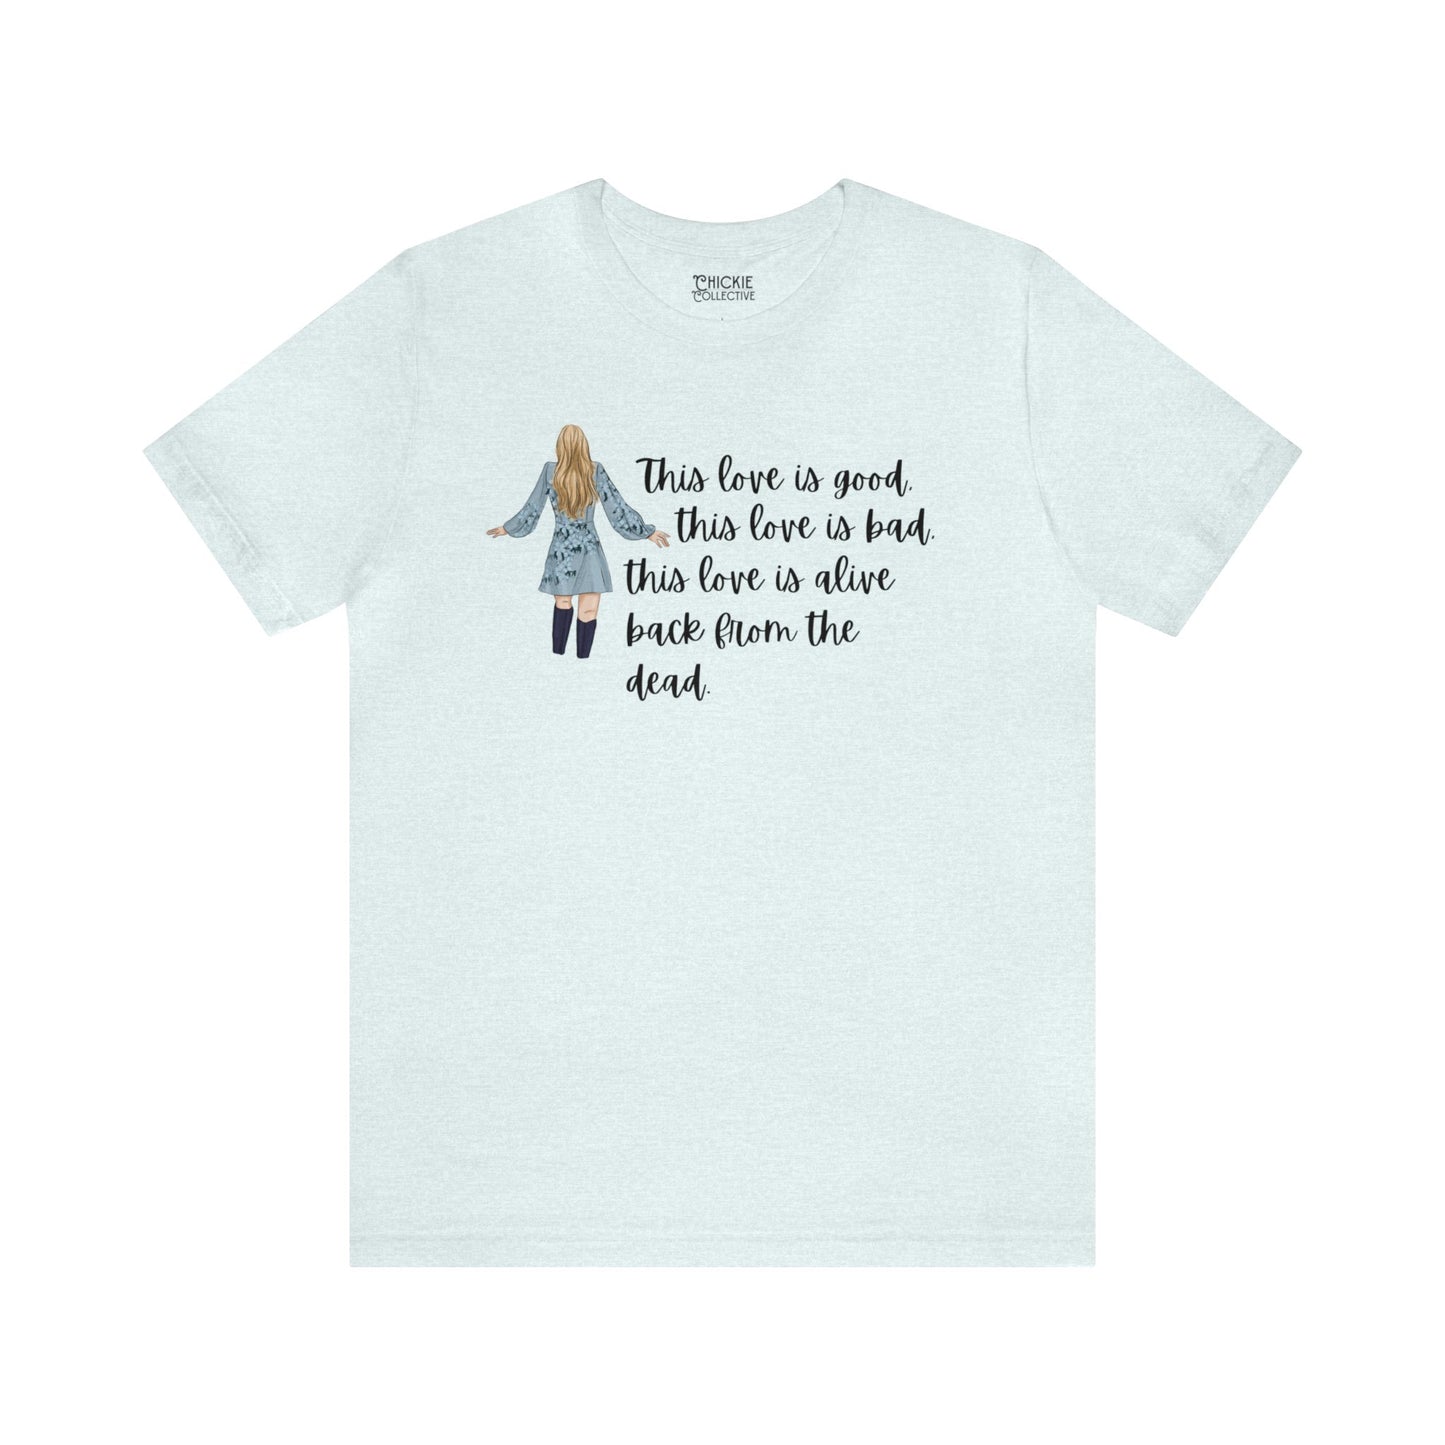 Taylor Swift Preppy Picture T-Shirt - This Love Is Good, This Love Is Bad